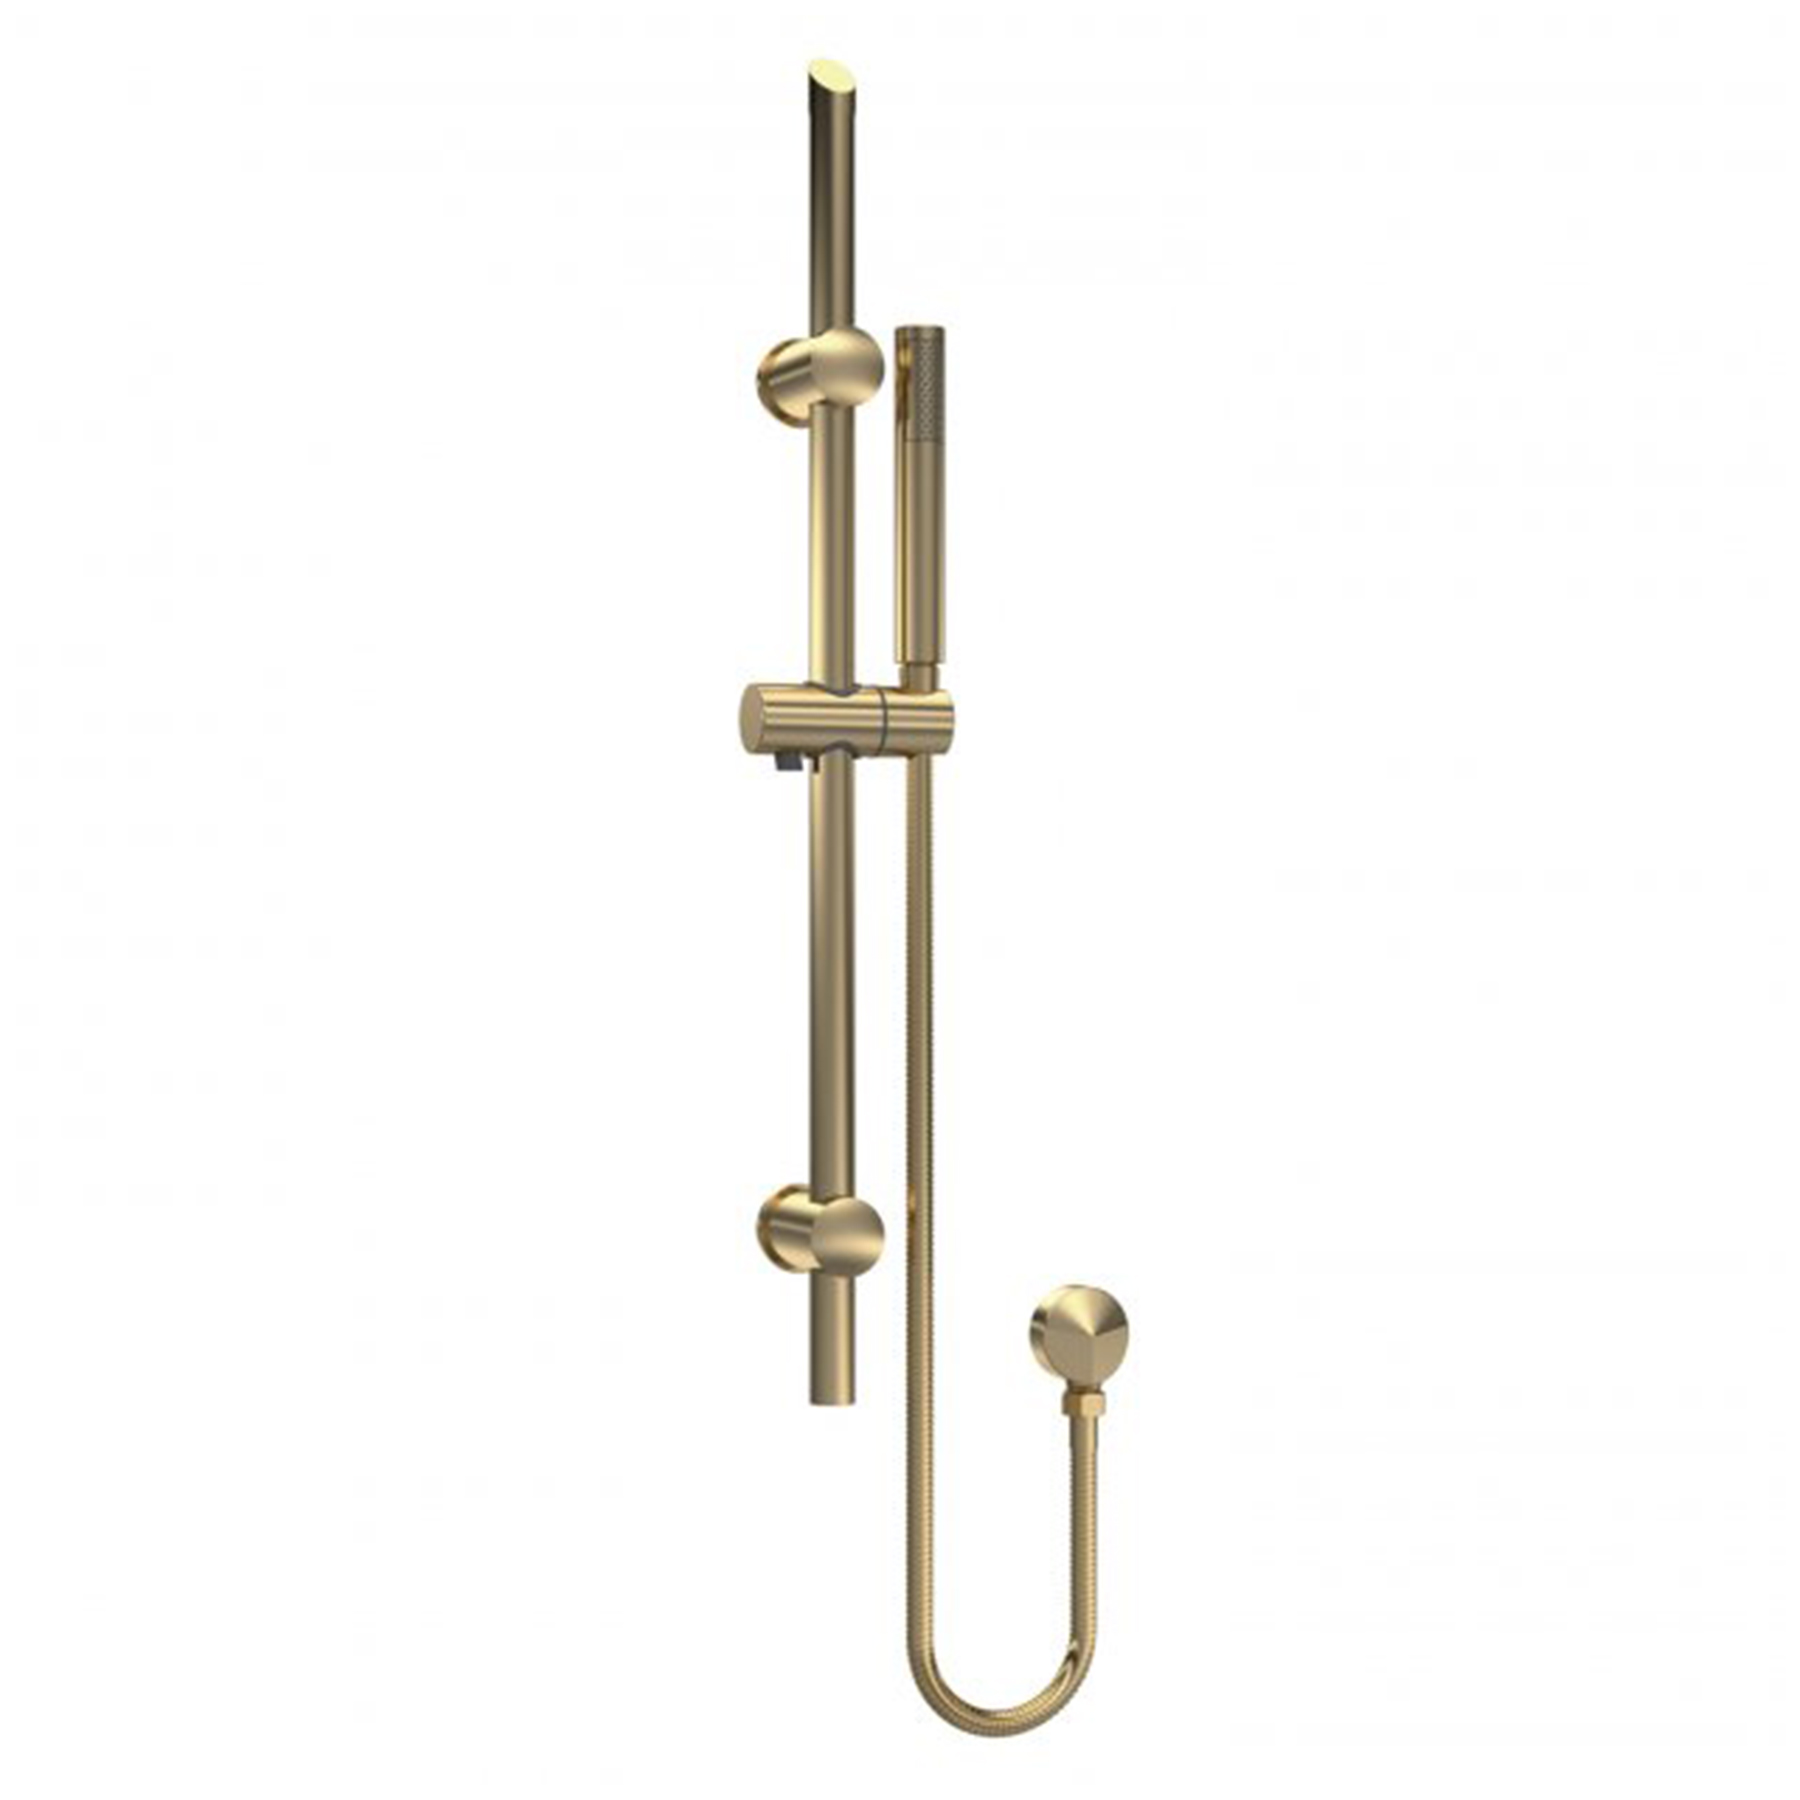 Windon Round Brushed Brass Slider Rail Shower Kit with Outlet Elbow